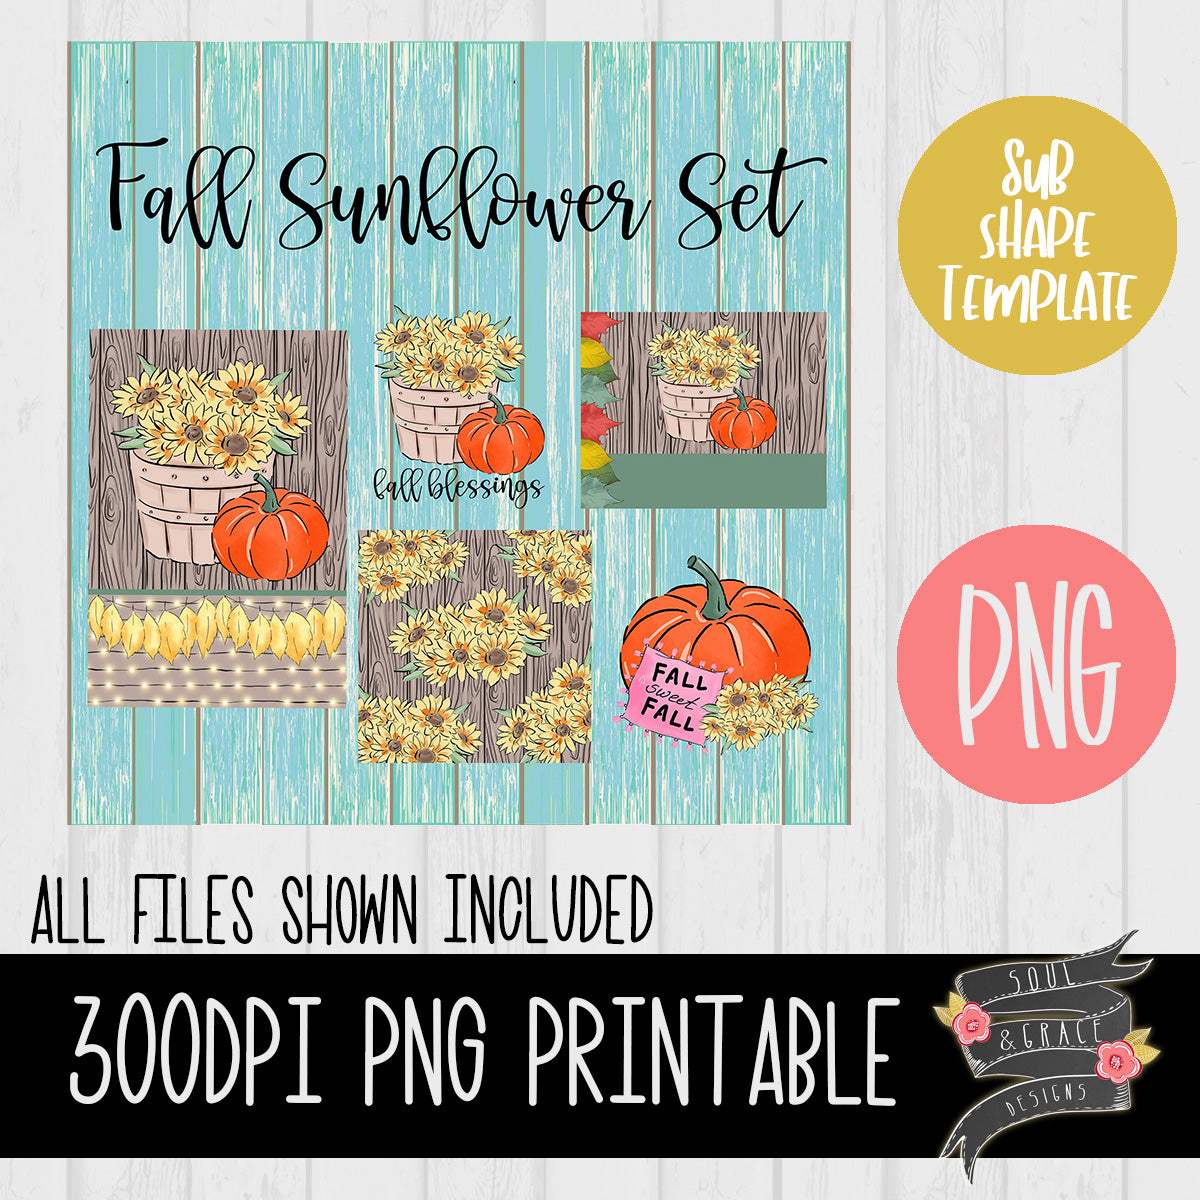 Fall Sunflowers Sublimation Template Set